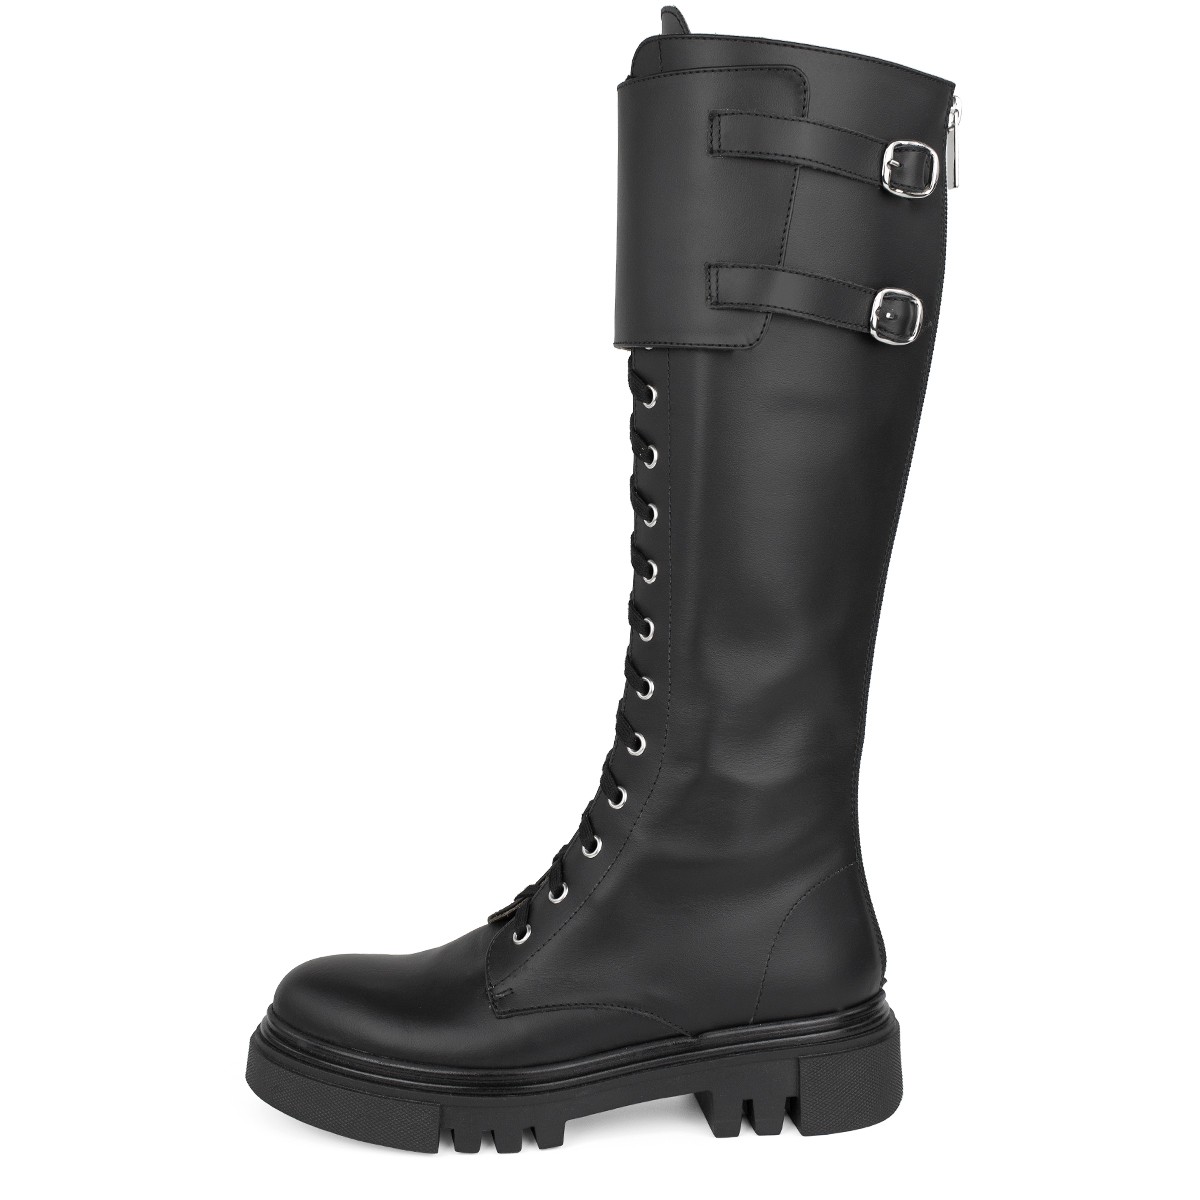 BLACK COMBAT BOOTS WITH BUCKLES AND FLAT HEEL